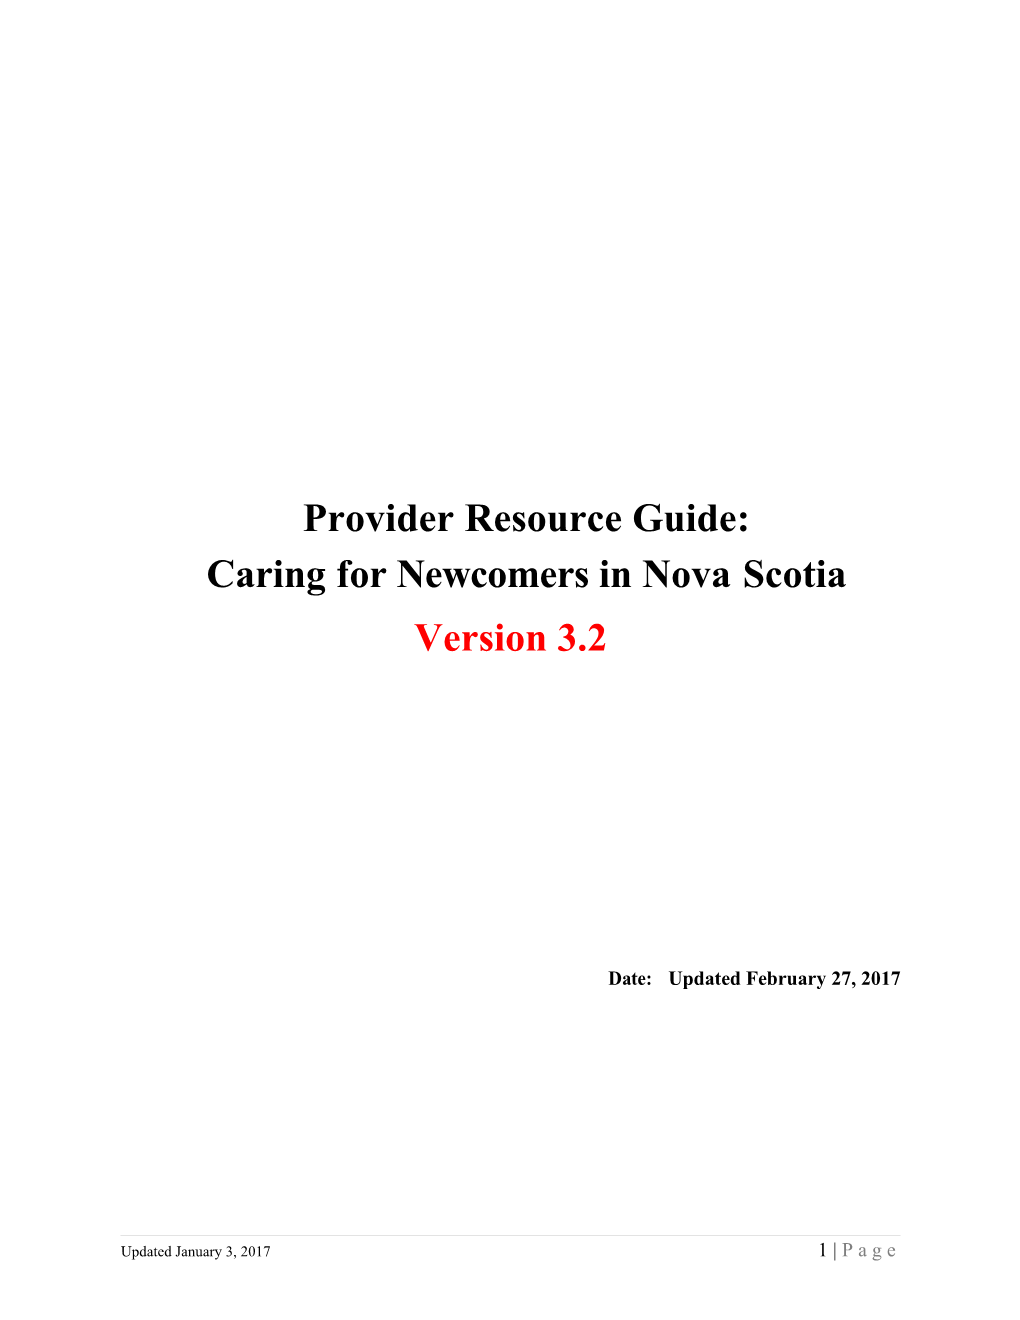 Provider Resource Guide: Caring for Newcomers to Nova Scotia